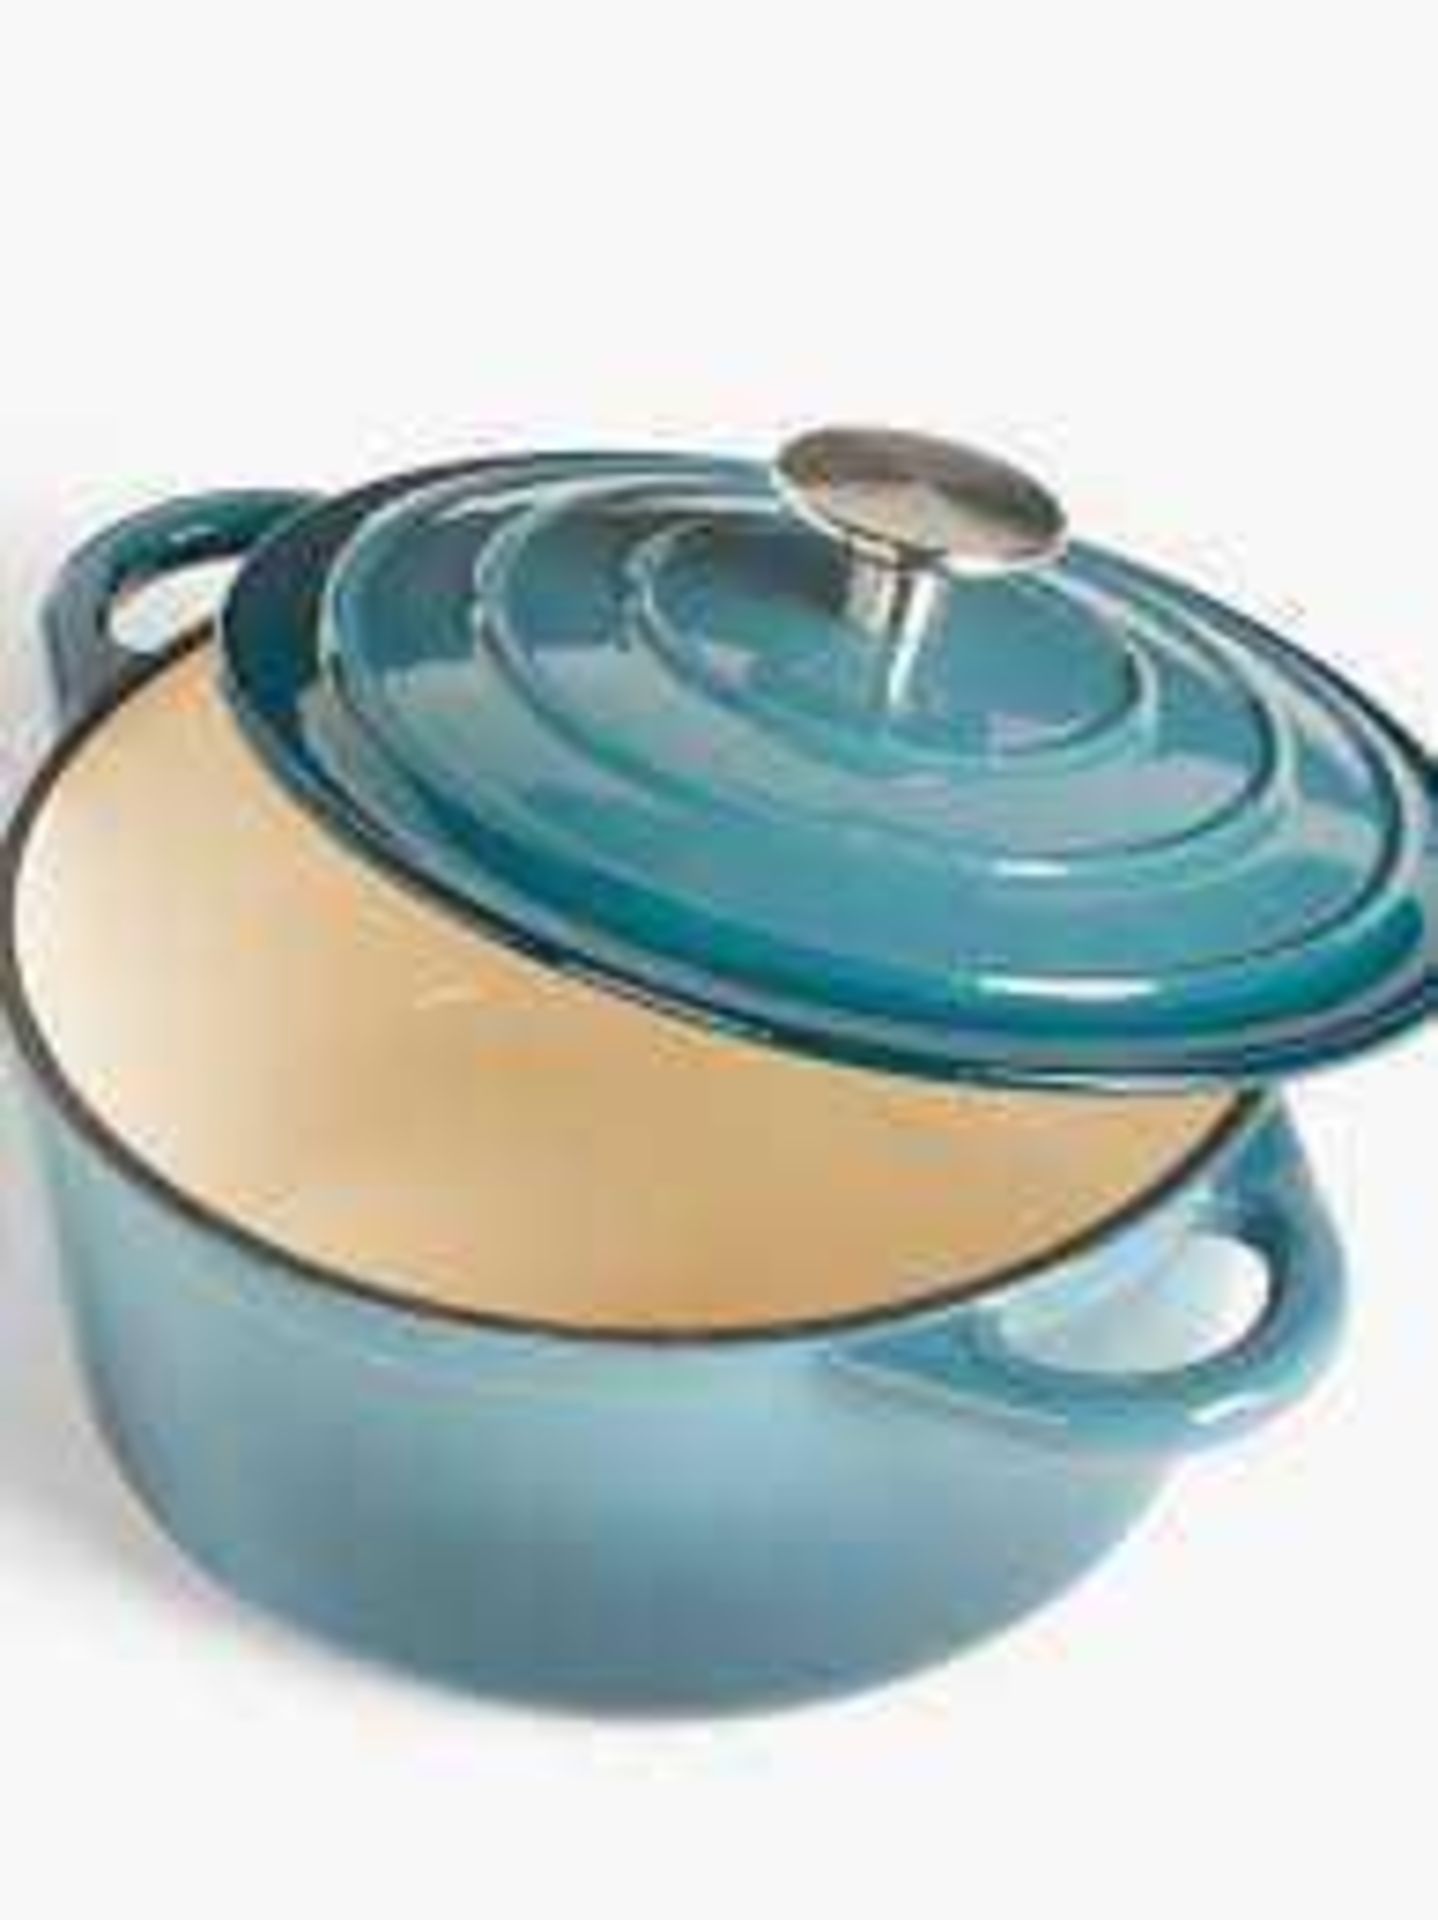 Combined RRP £130 Lot To Contain Boxed John Lewis Cast Iron Casserole Dish And Stainless Steel Stock - Image 2 of 2